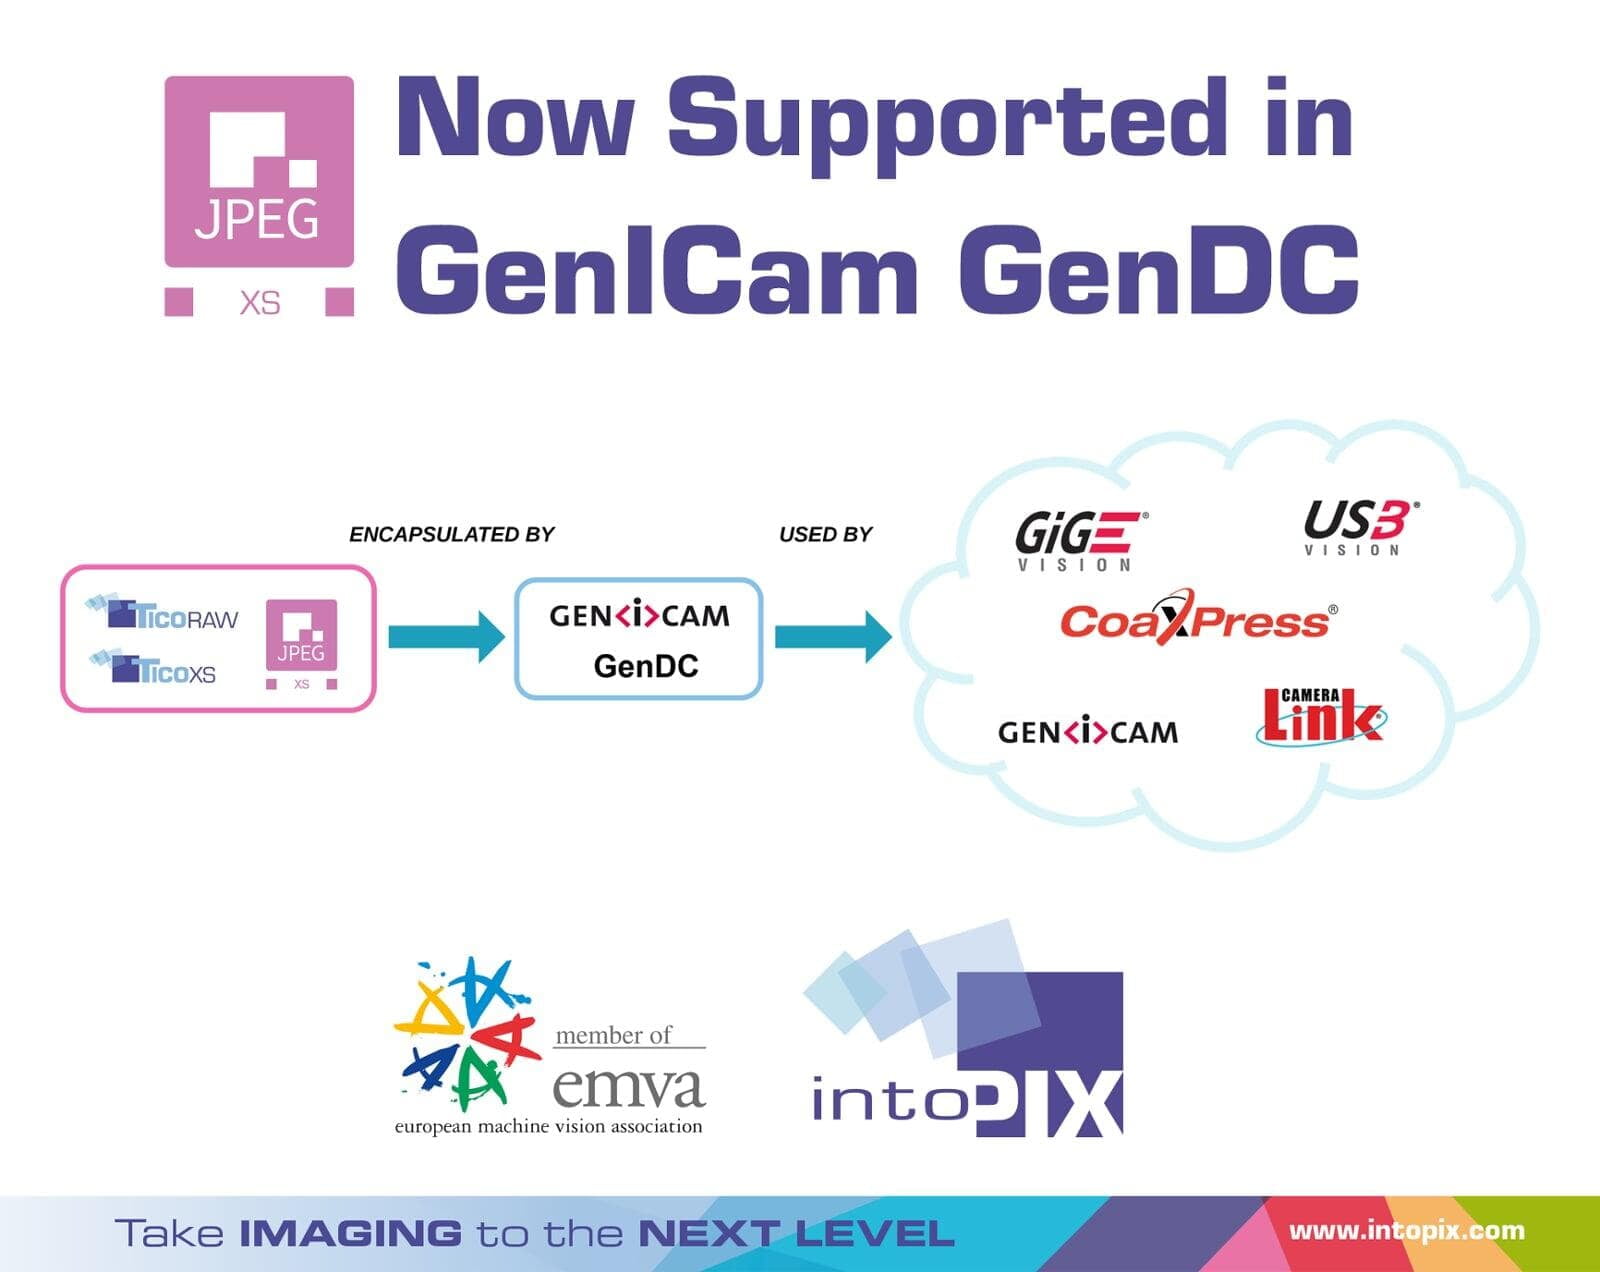 JPEG XS Joins GenICam Standard in Machine Vision, Managed by EMVA